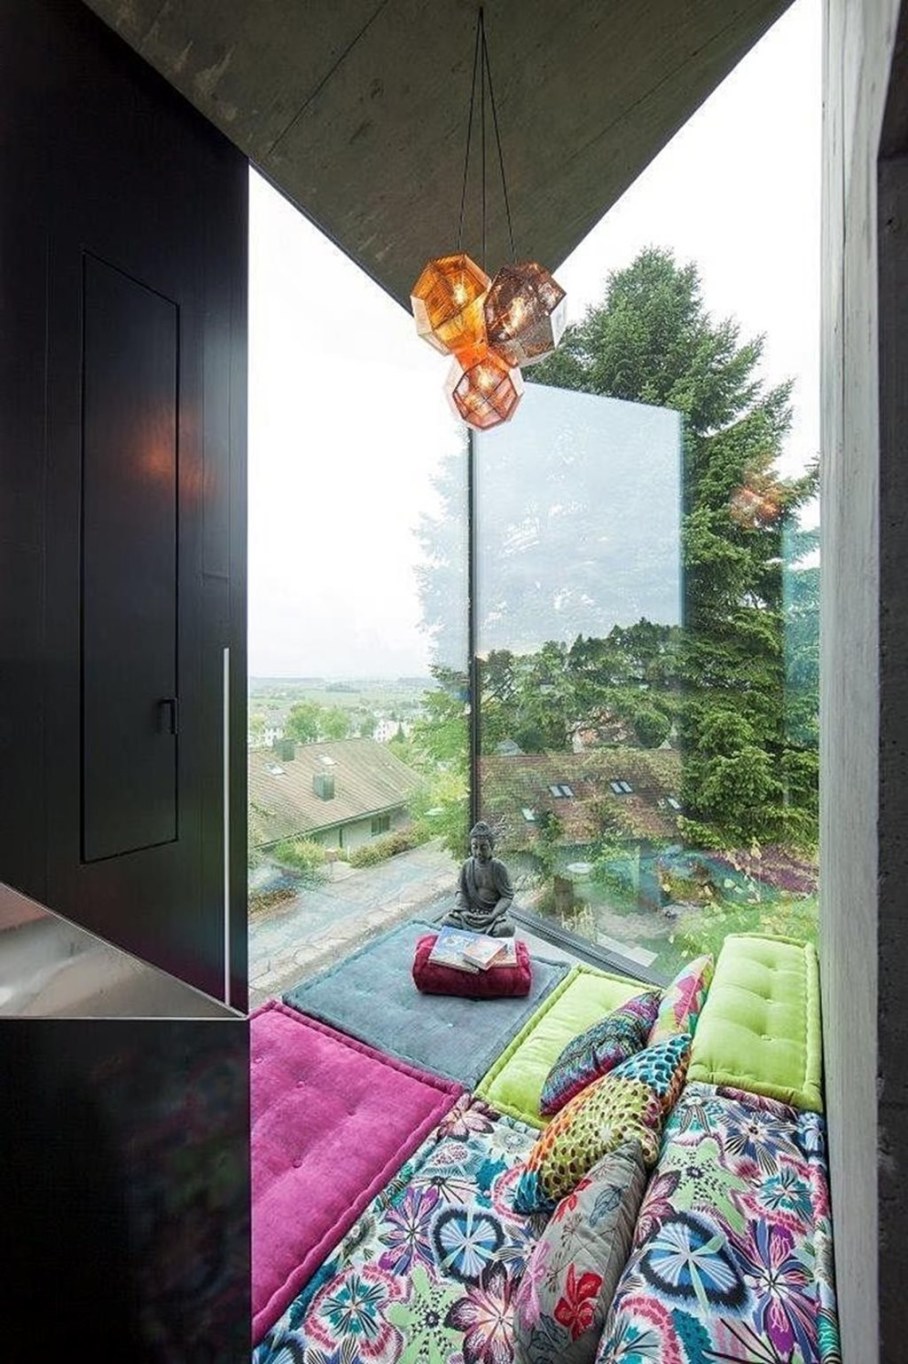 Design country house of glass and concrete 11